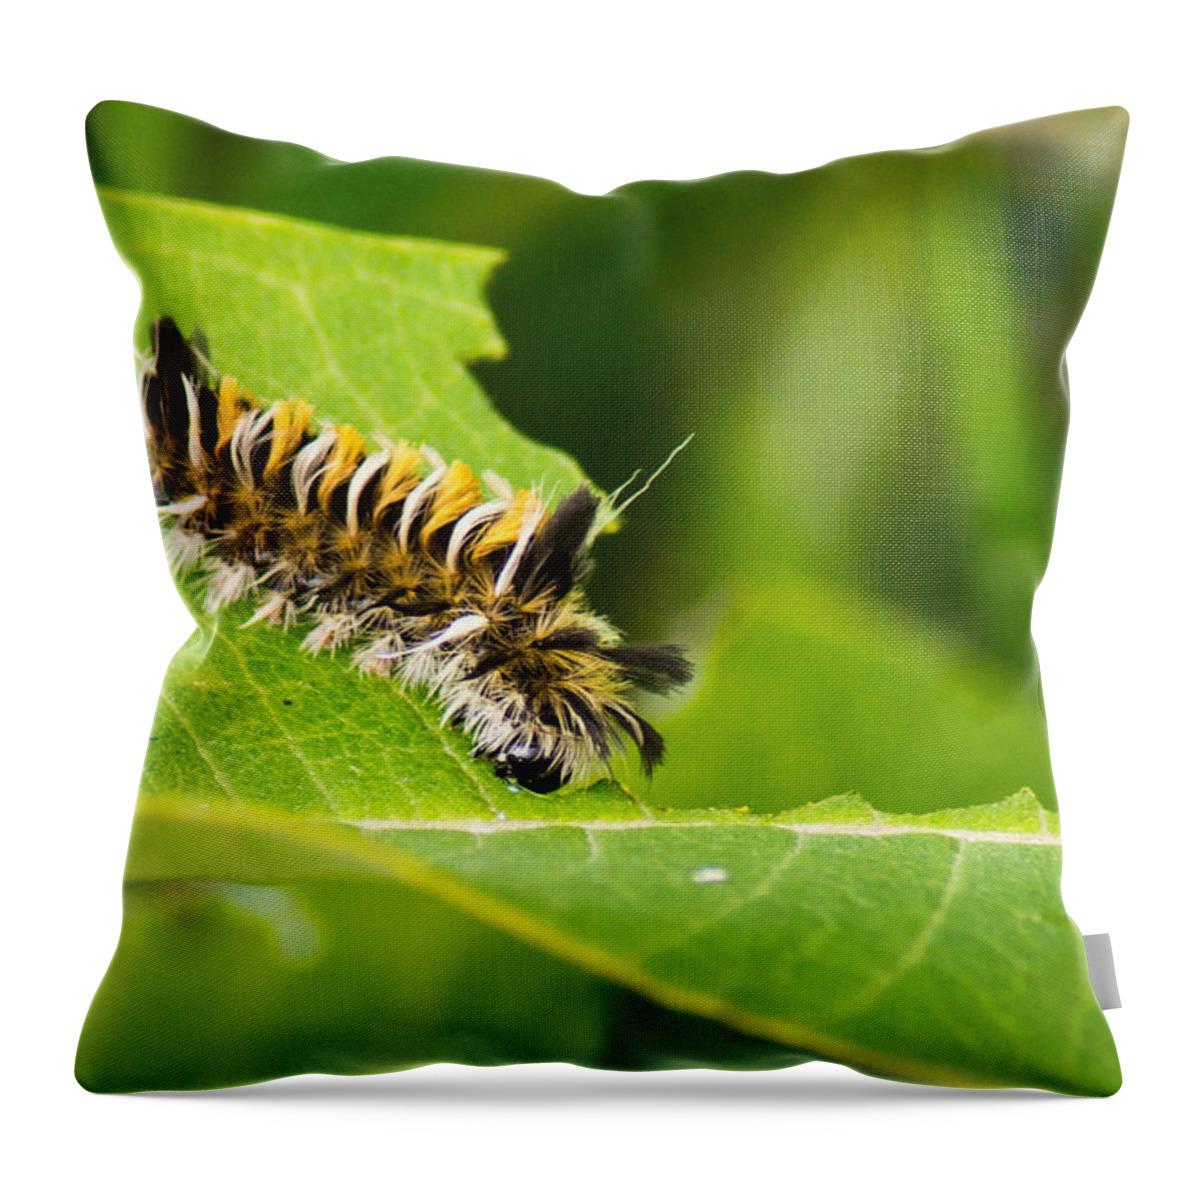 Macro Throw Pillow featuring the photograph Wild and Woolly by Bill Pevlor